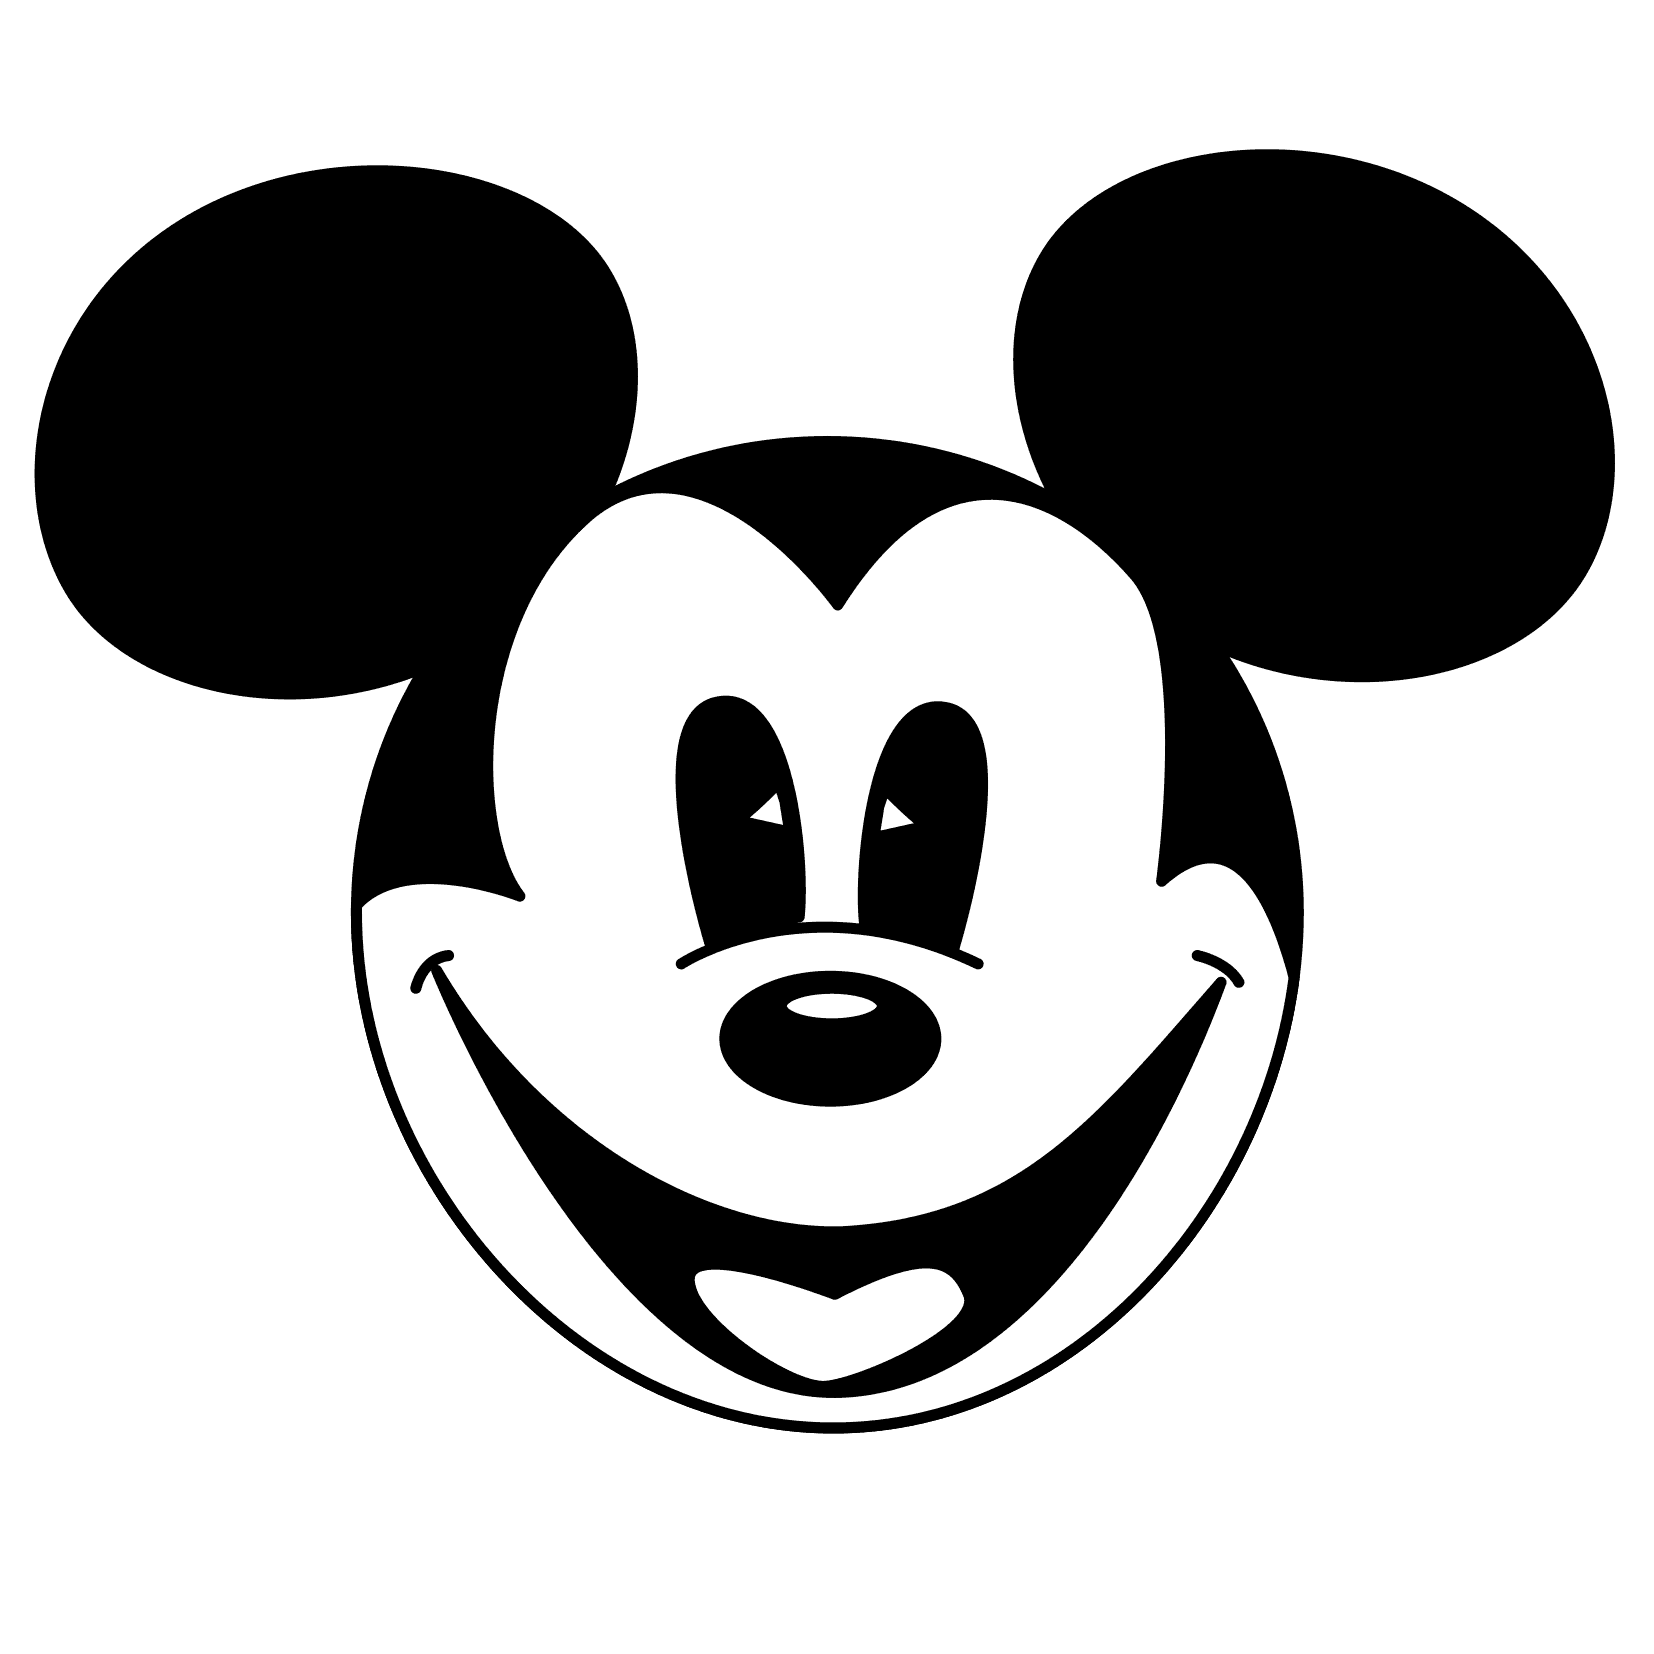 Mickey mouse polka dot head clipart black and white